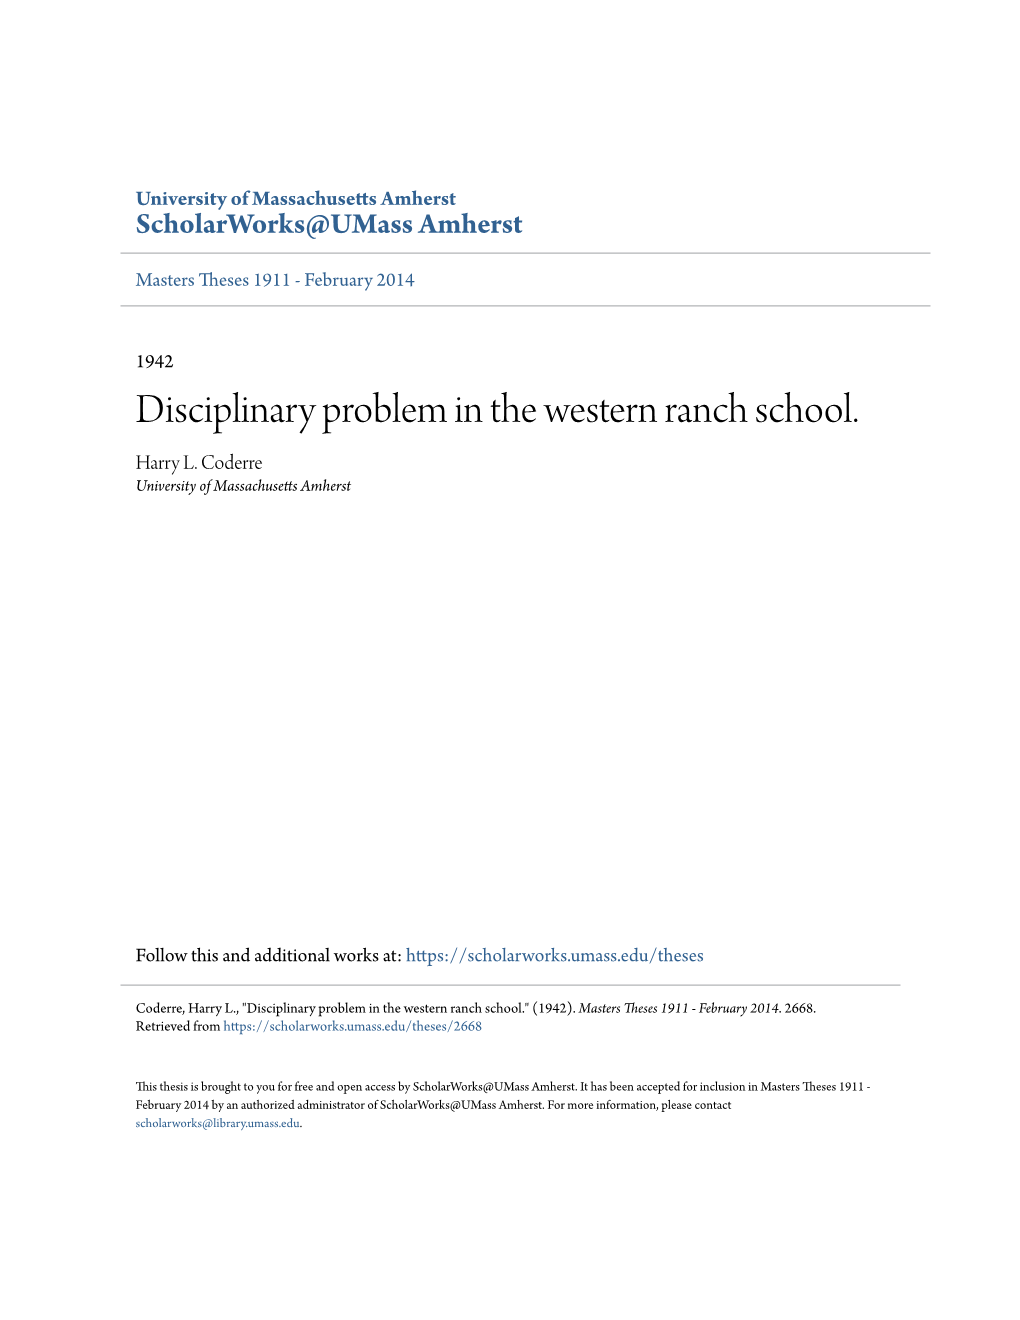 Disciplinary Problem in the Western Ranch School. Harry L